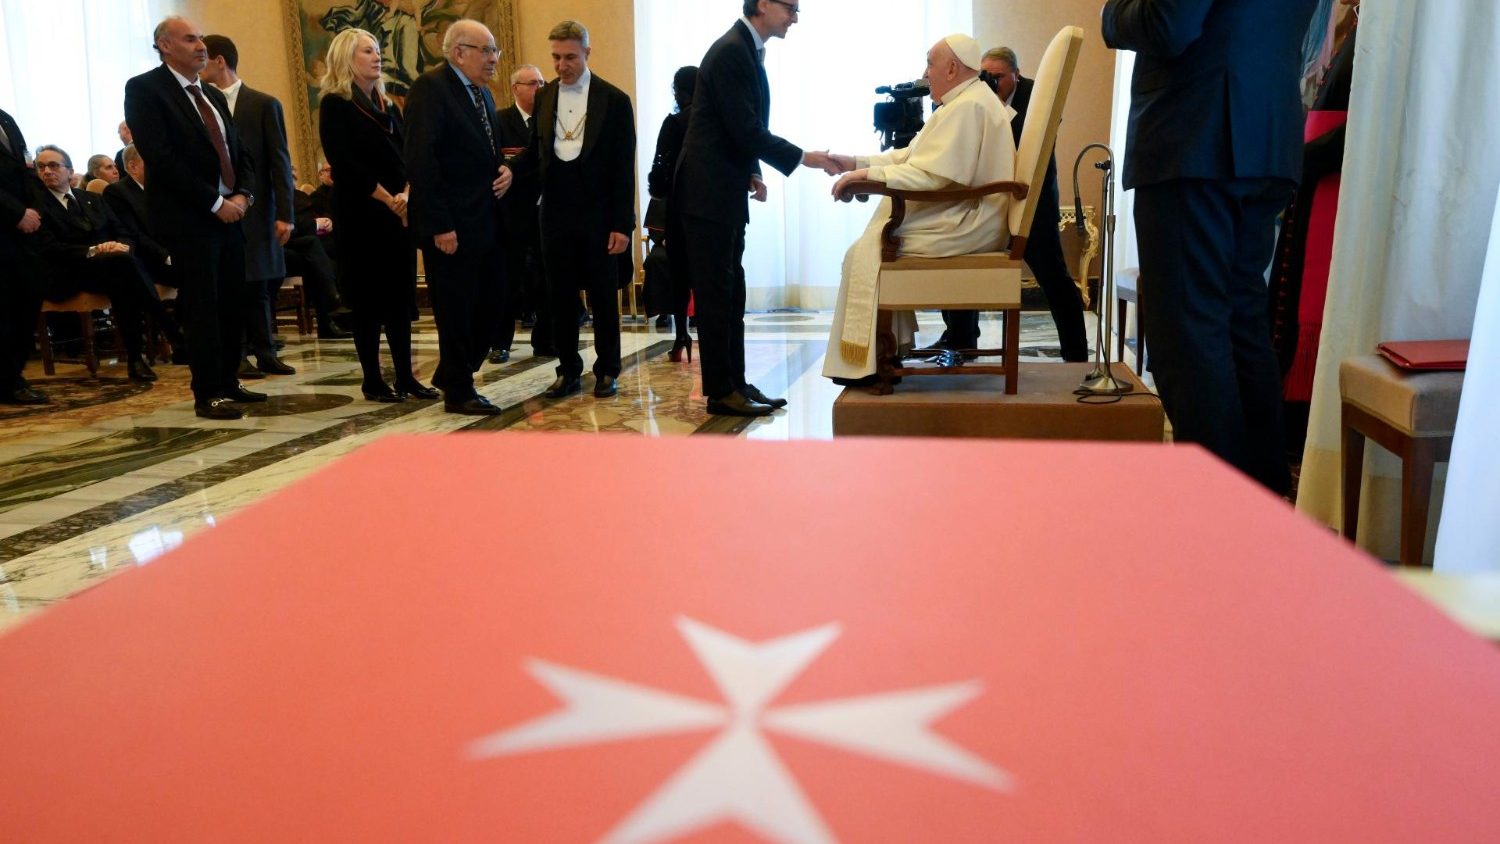 The Pope encourages the Order of Malta to continue its “humanitarian diplomacy”